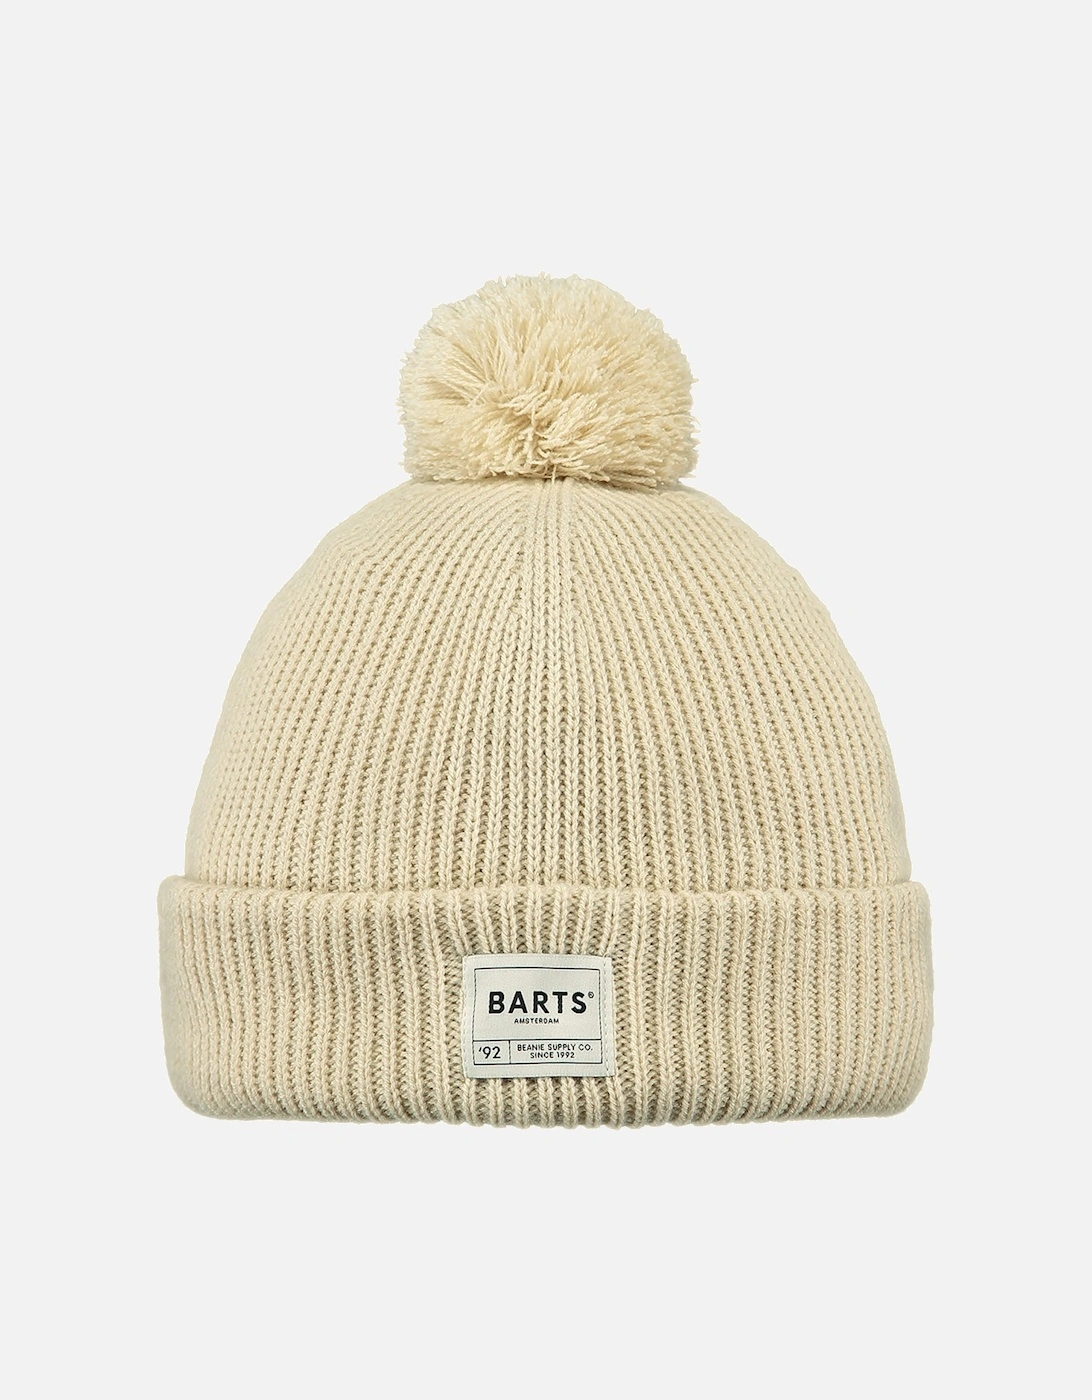 Mens Arkade Stretchy Knitted Bobble Hat